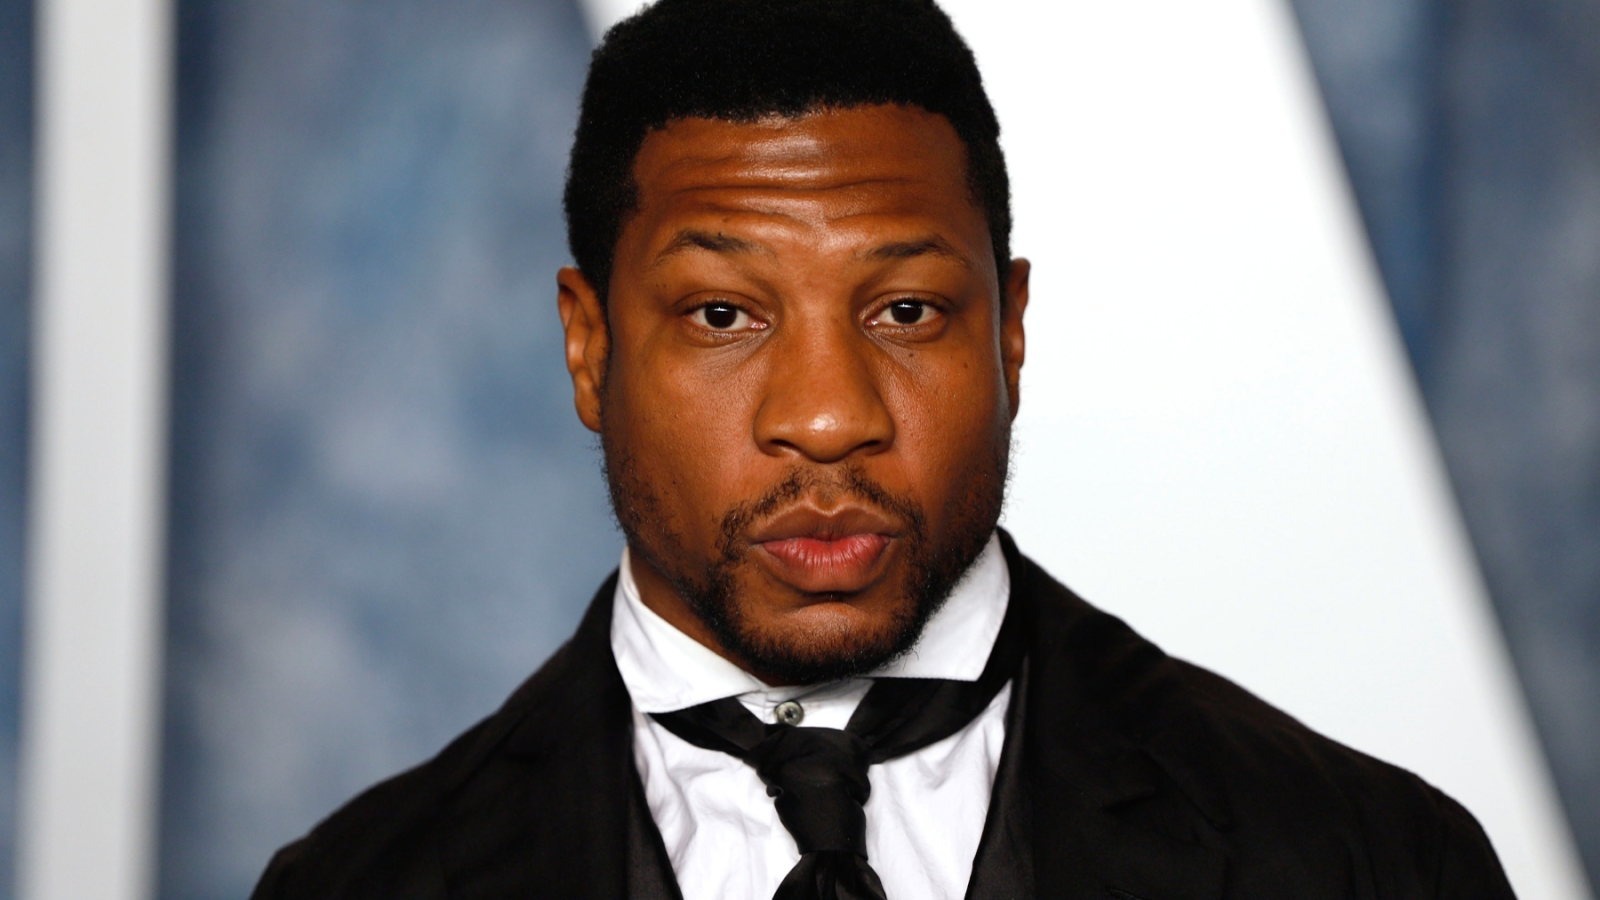 Jonathan Majors Arrested for Allegedly Strangling, Assaulting, Harassing Woman in New York